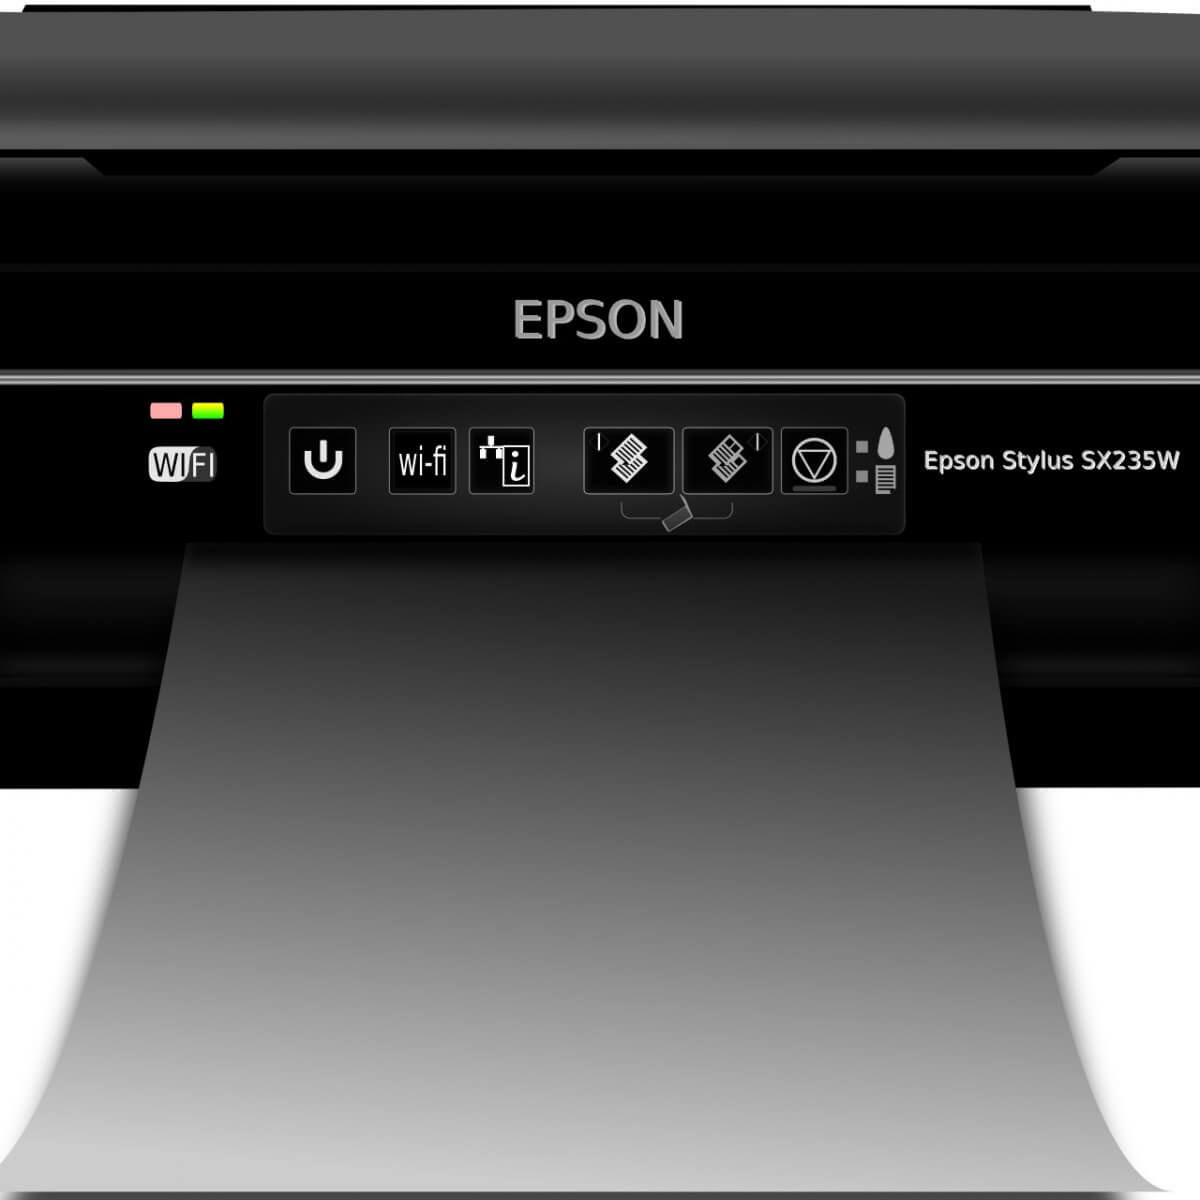 Epson Print And Scan Software Download App For Windows 10